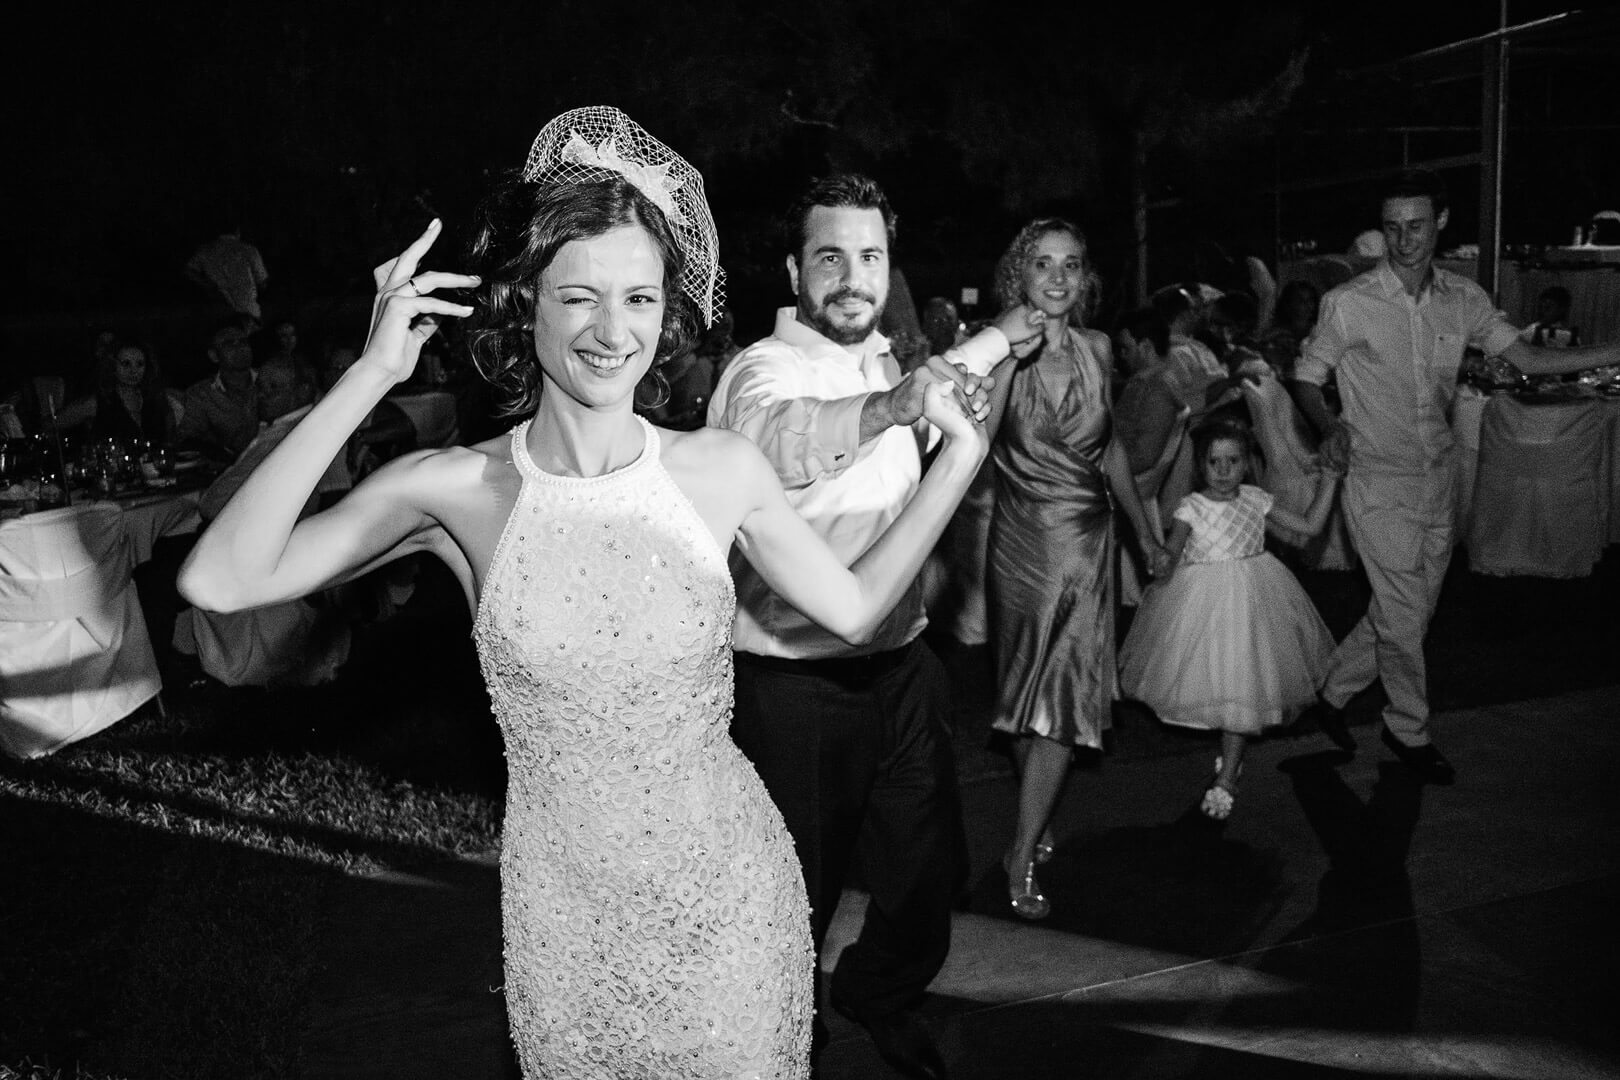 The bride leading the dance winking at the camera